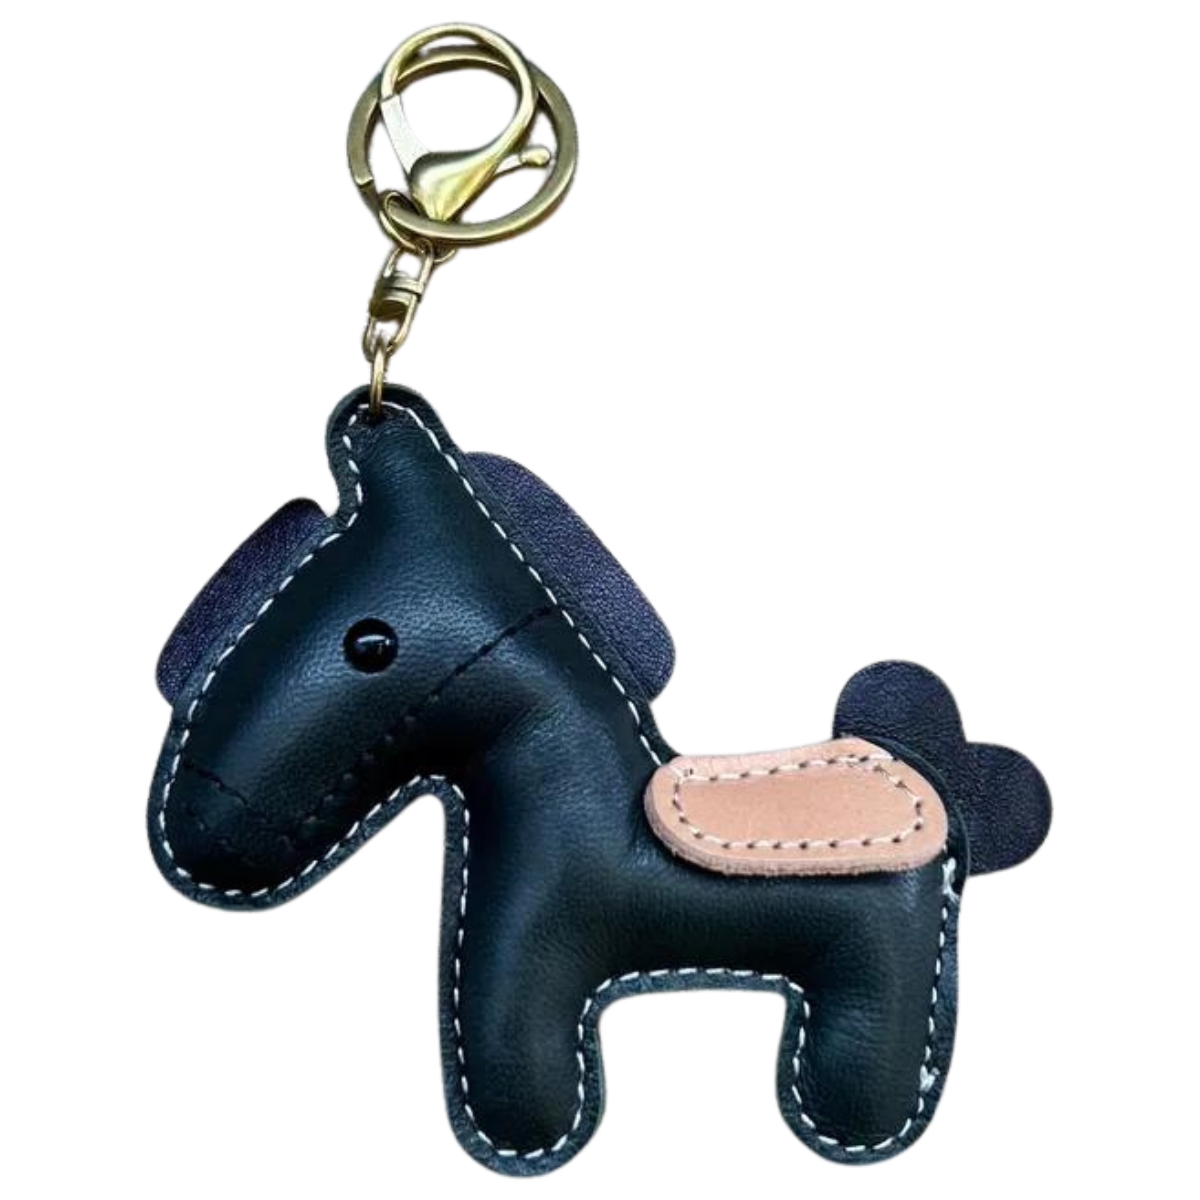 Leather Pony Bag Charm in Black